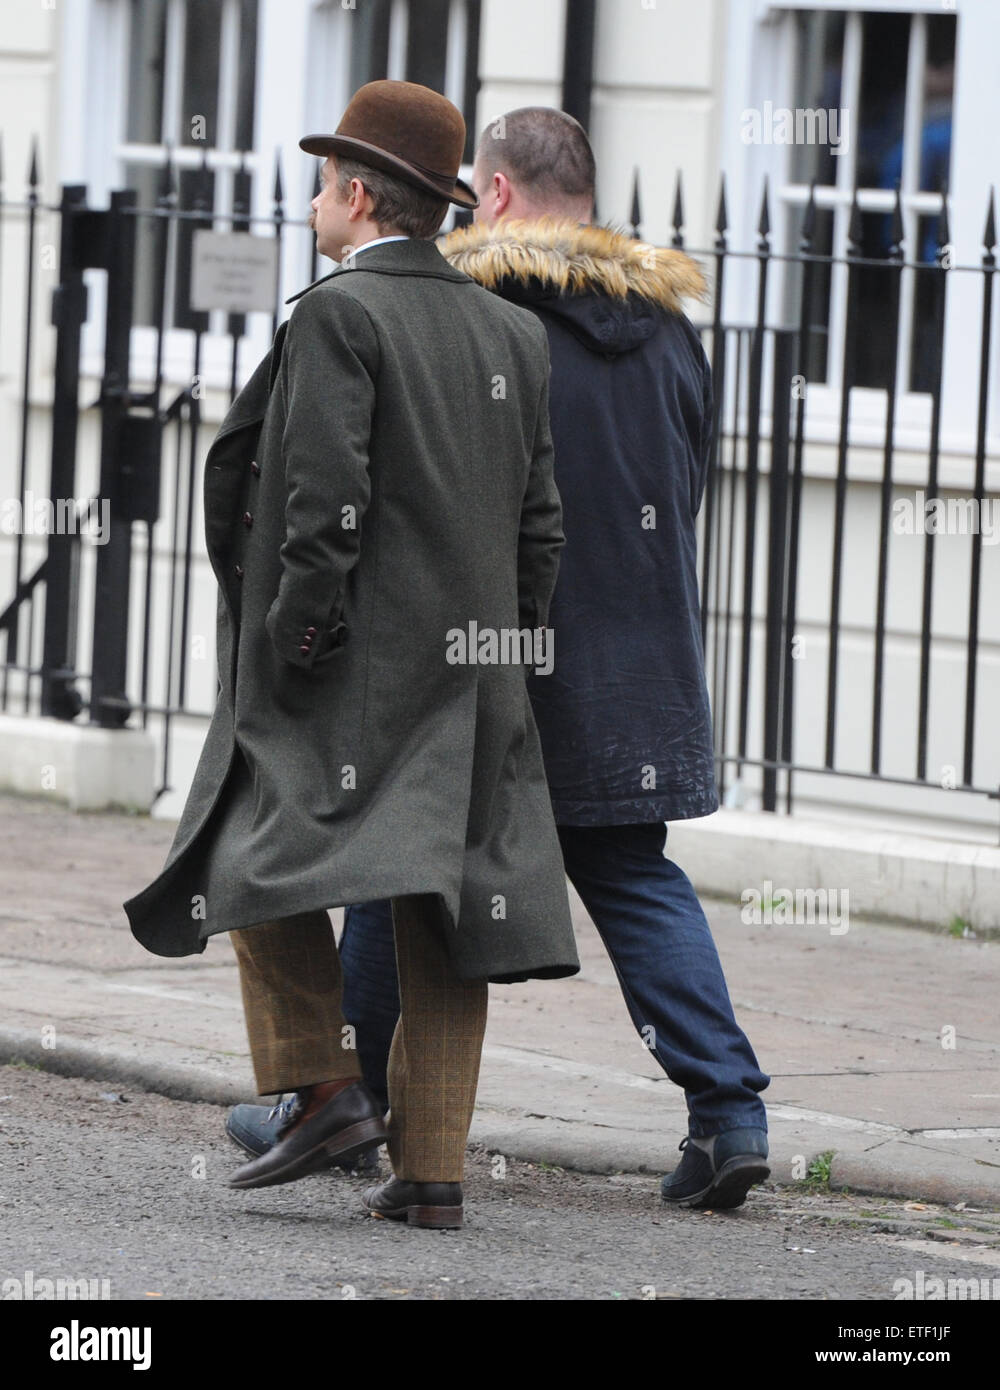 Benedict Cumberbatch and the cast of 'Sherlock' film the annual Christmas special in London  Featuring: Martin Freeman Where: London, United Kingdom When: 07 Feb 2015 Credit: WENN.com Stock Photo